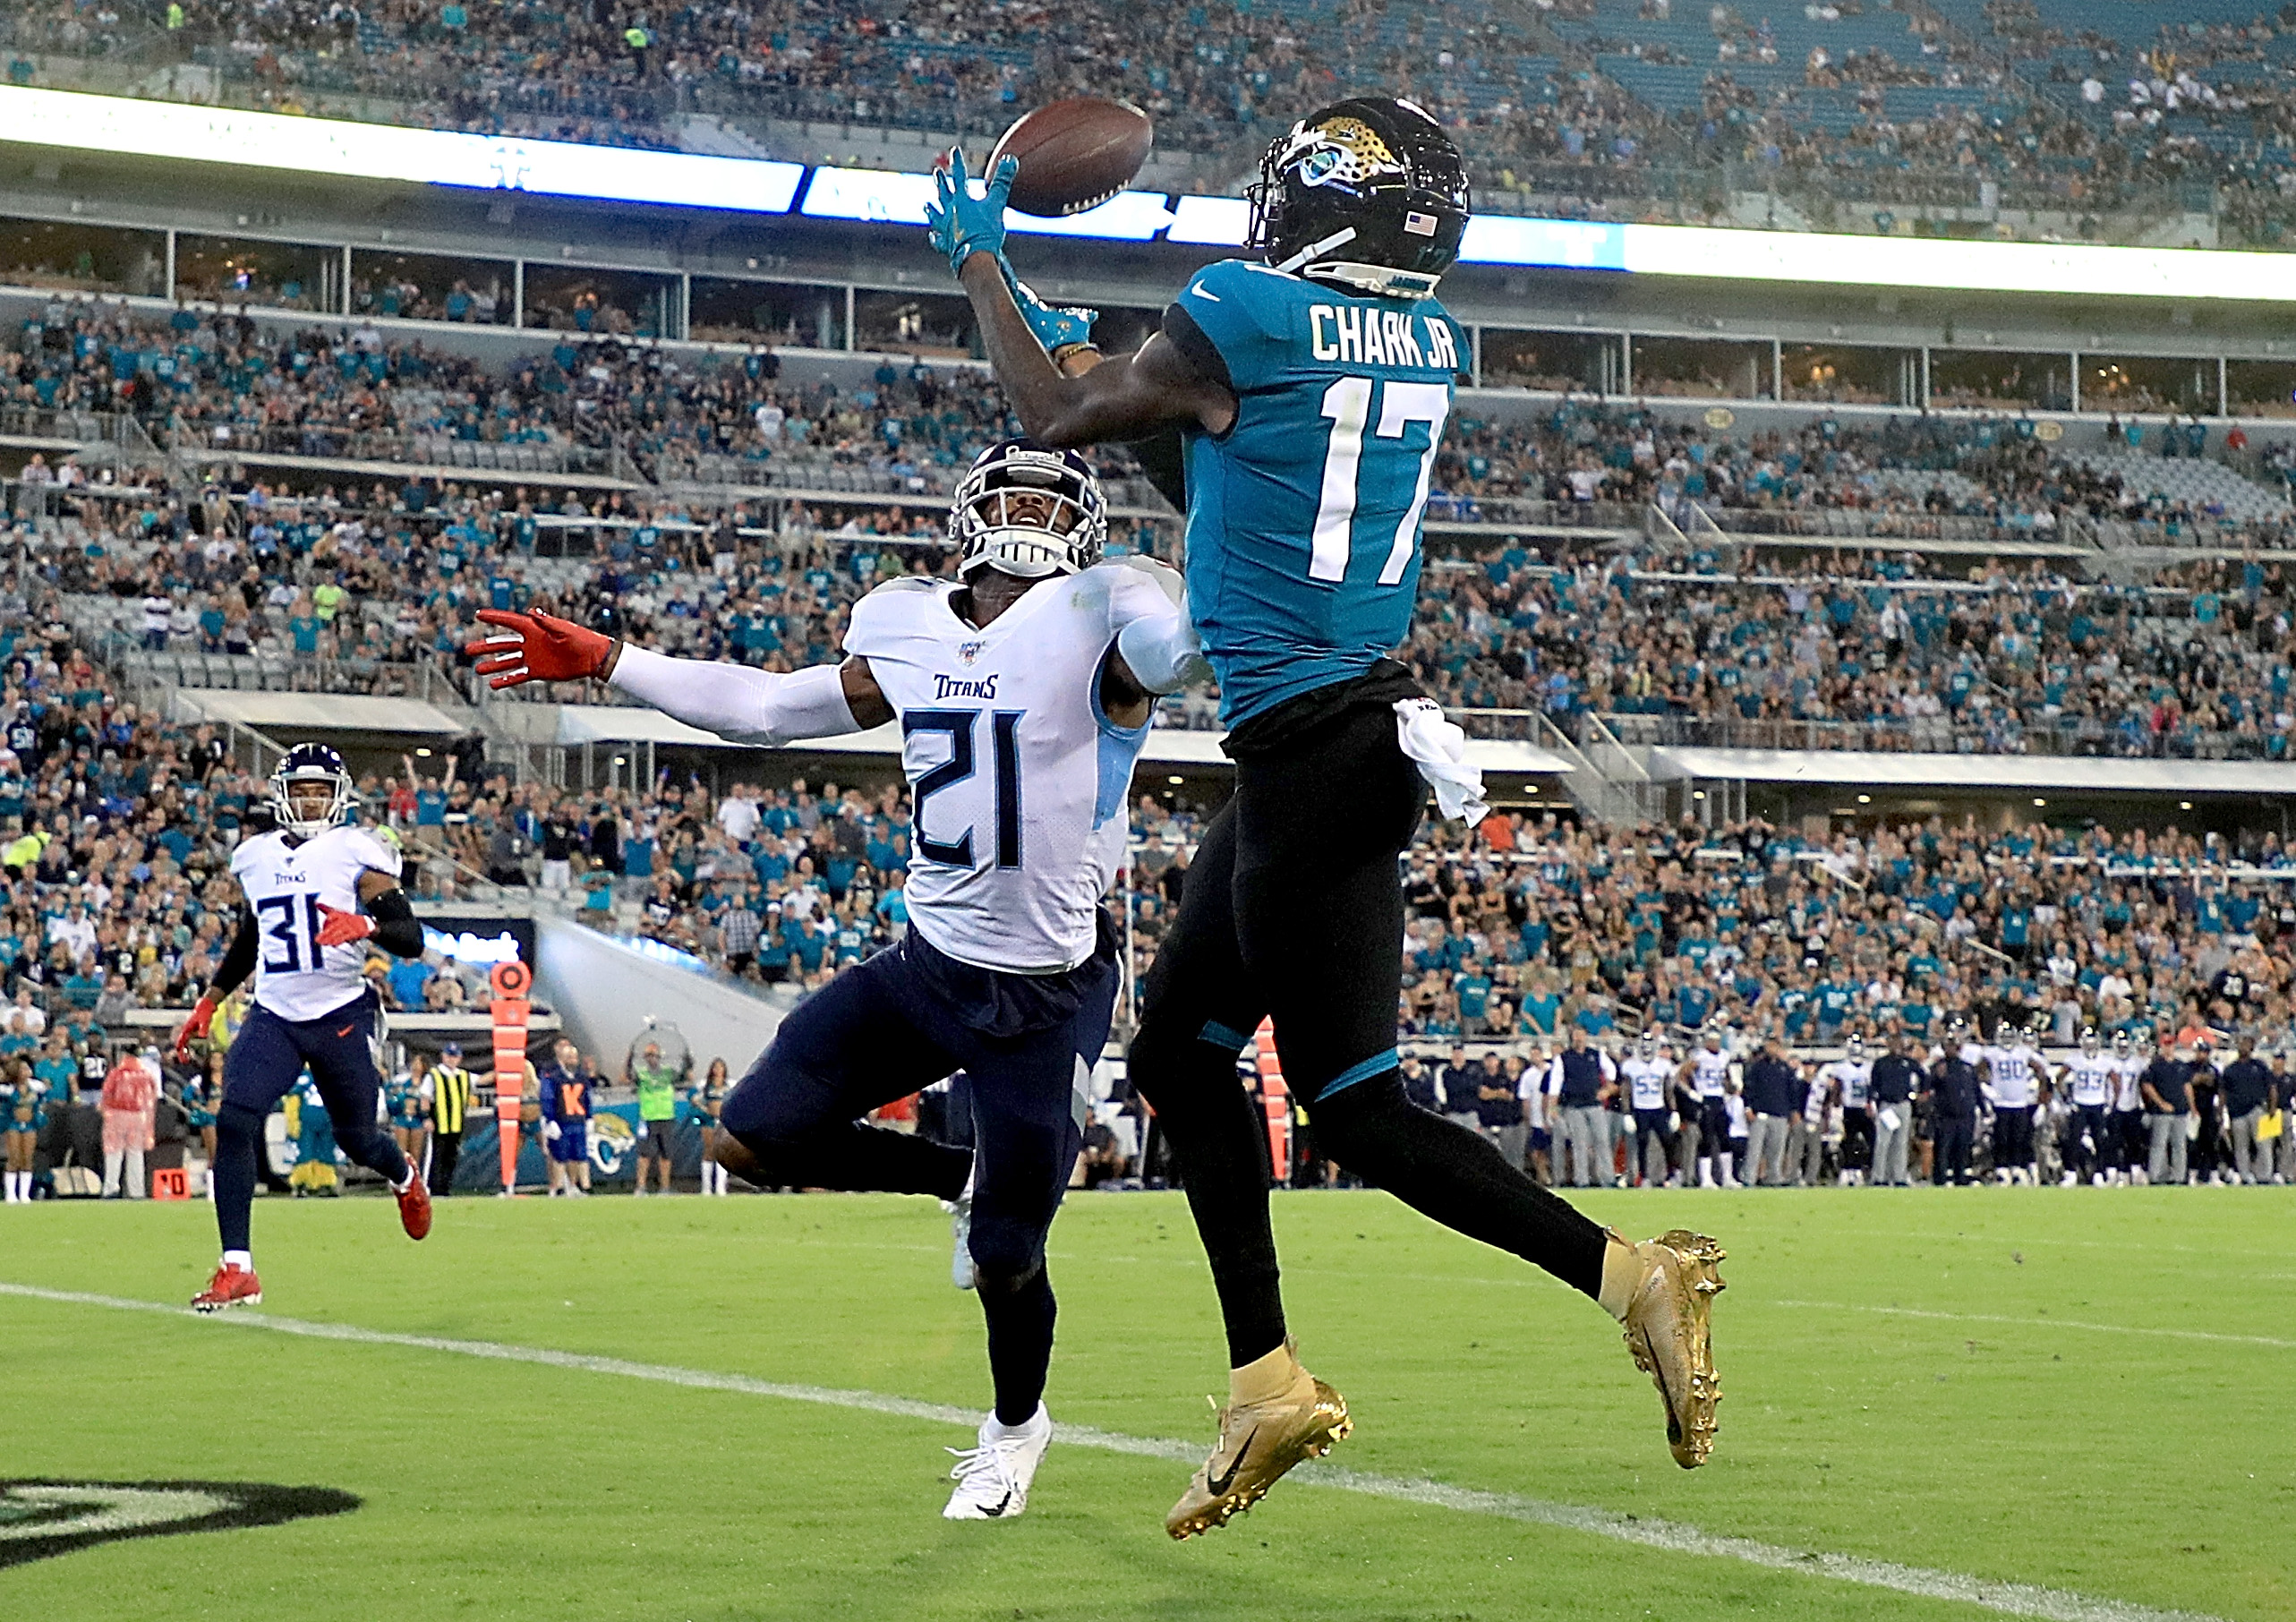 Panthers vs. Jaguars 4 matchups to watch in Sunday’s game